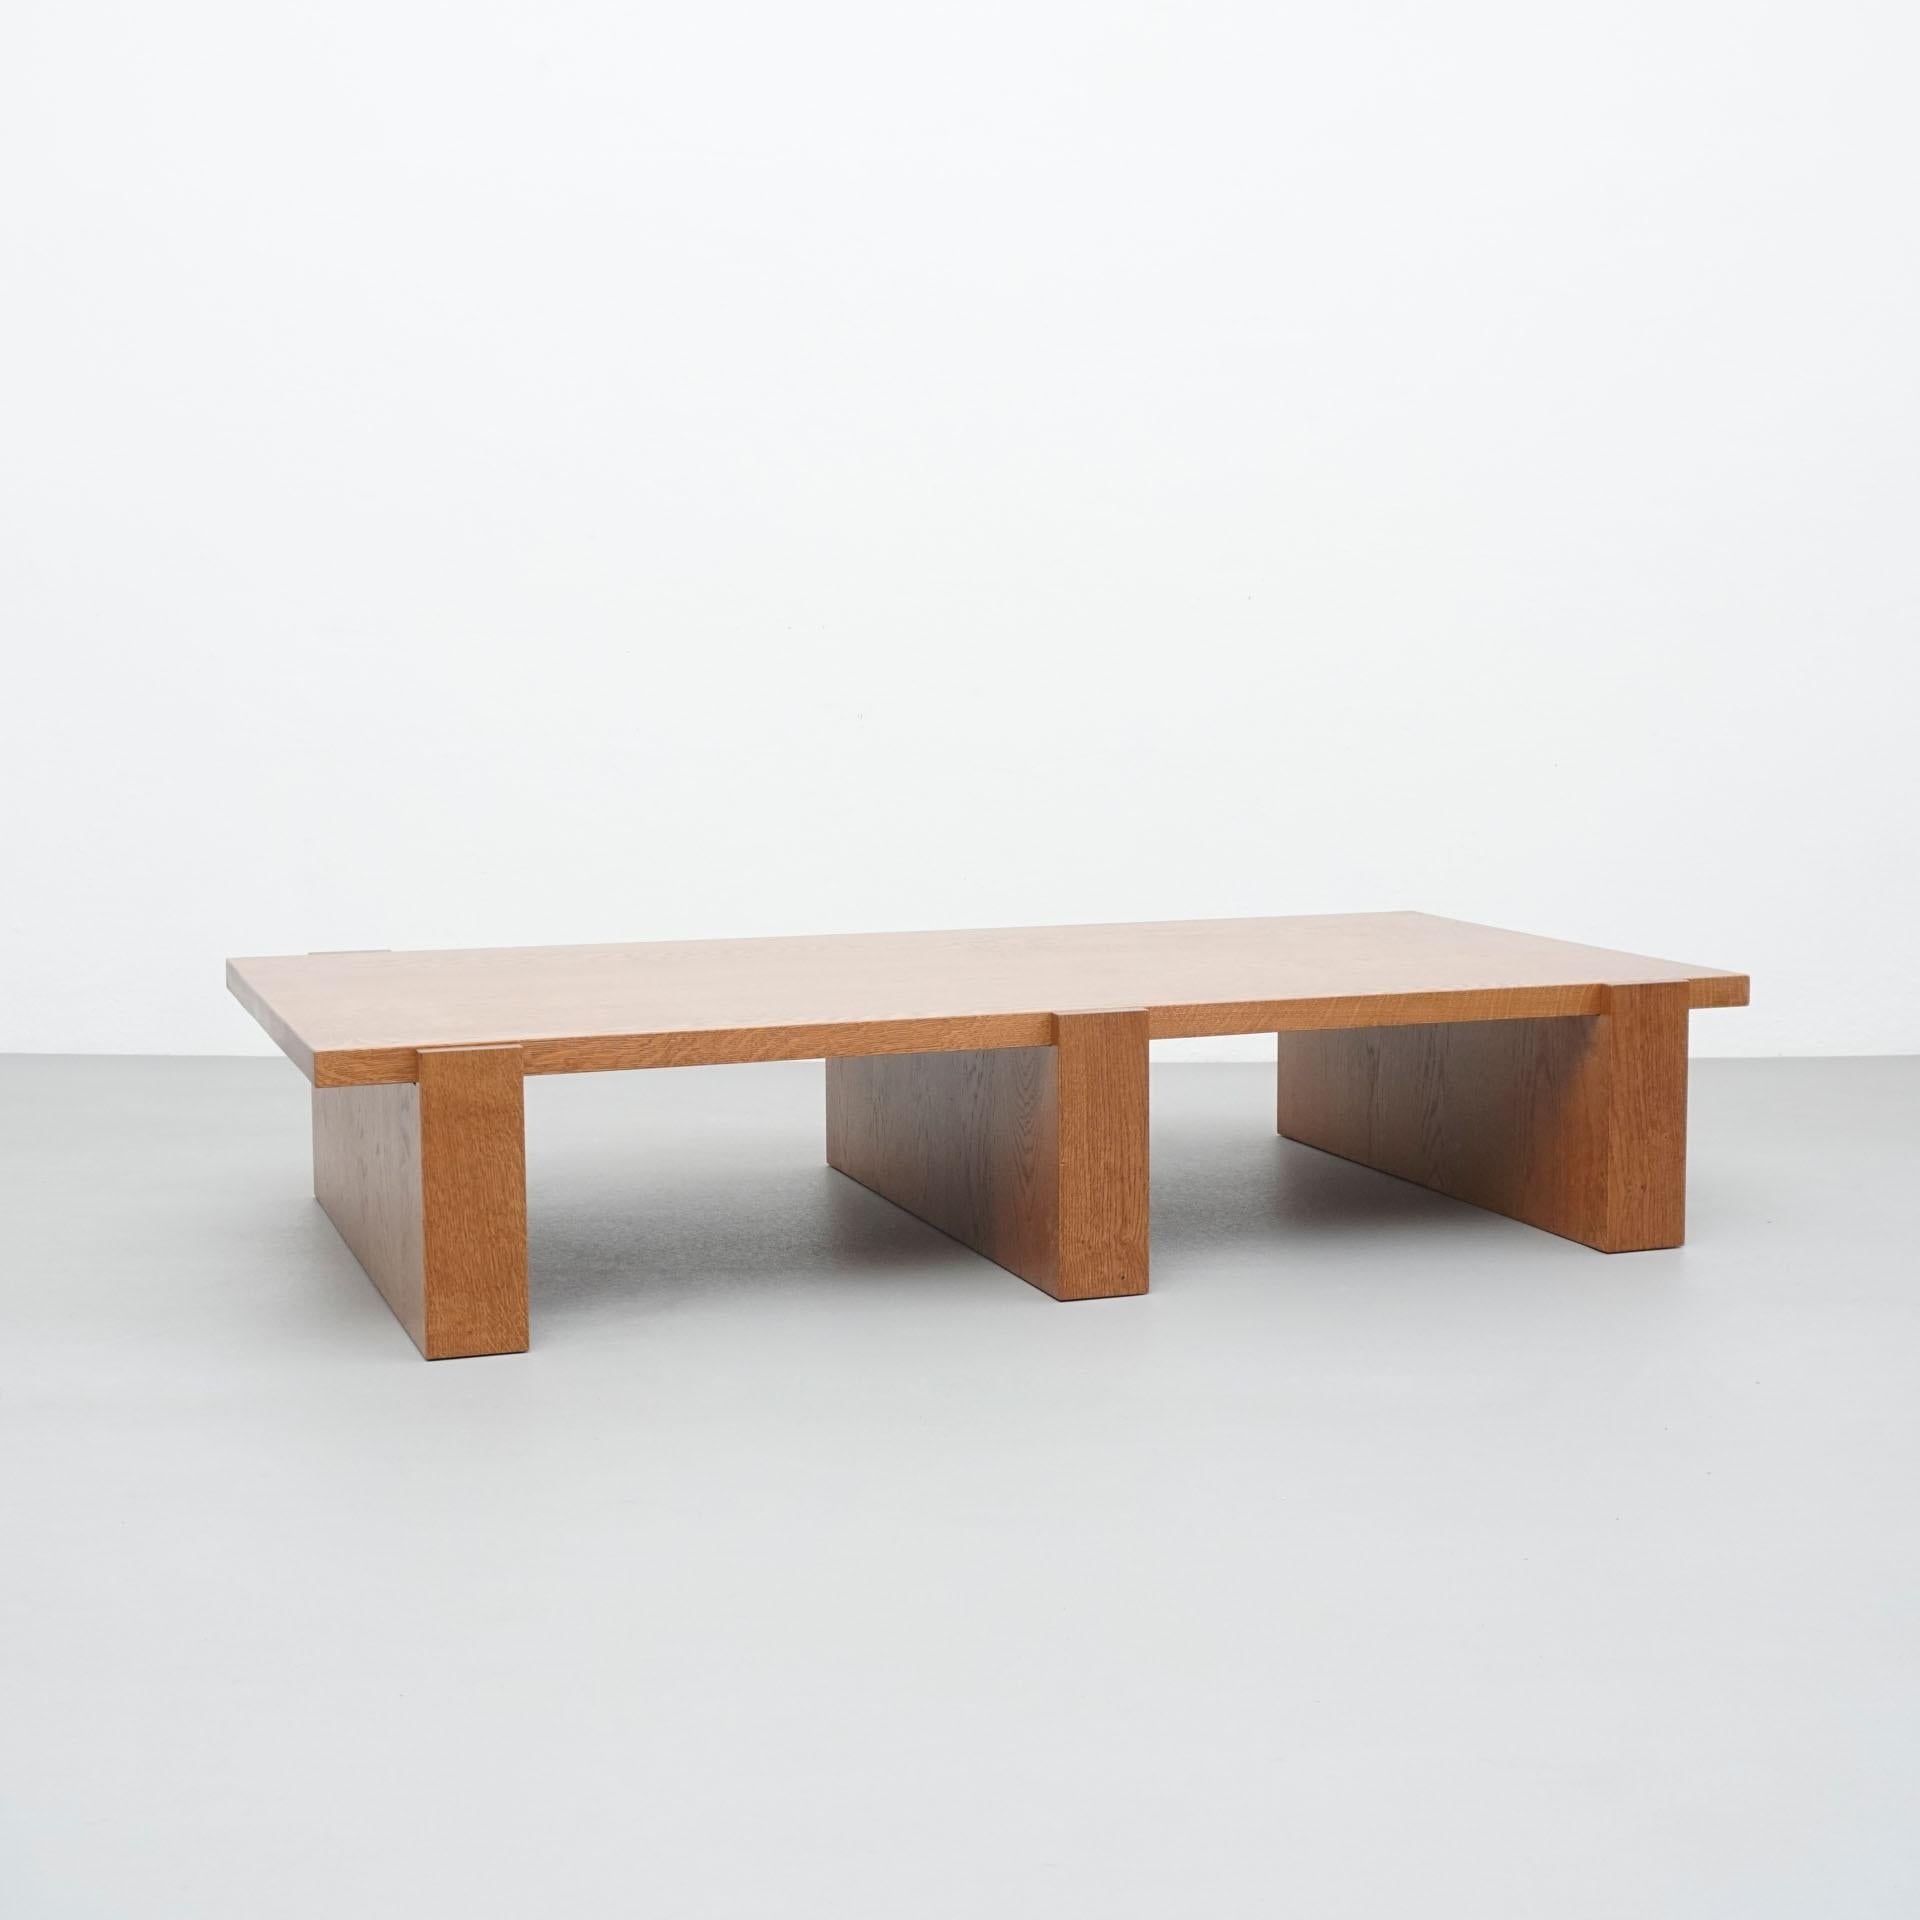 Table by Dada est. manufactured in Barcelona, 2021.

 Oak table

Measures: 85 cm D x 160 cm W x 30 cm H 

Production delay: 8-9 weeks

There is the possibility of making it in different measures and woods.

Dada Est. Makes a handmade furniture